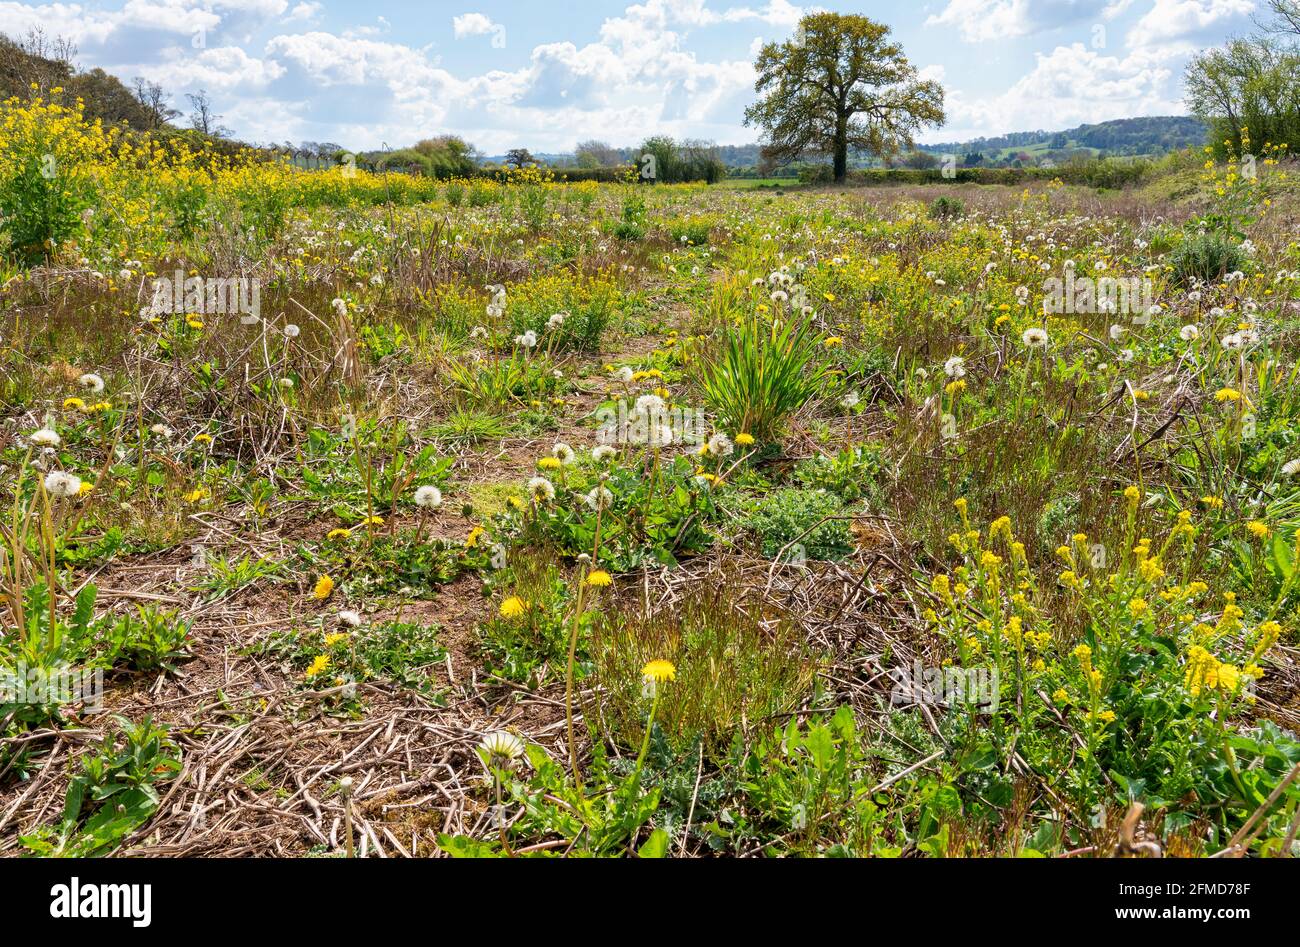 'Rewilded' meadow in a former arable field in Somerset UK containing  variety of common wildflowers and reseeded brassicas attracting bees and insects Stock Photo